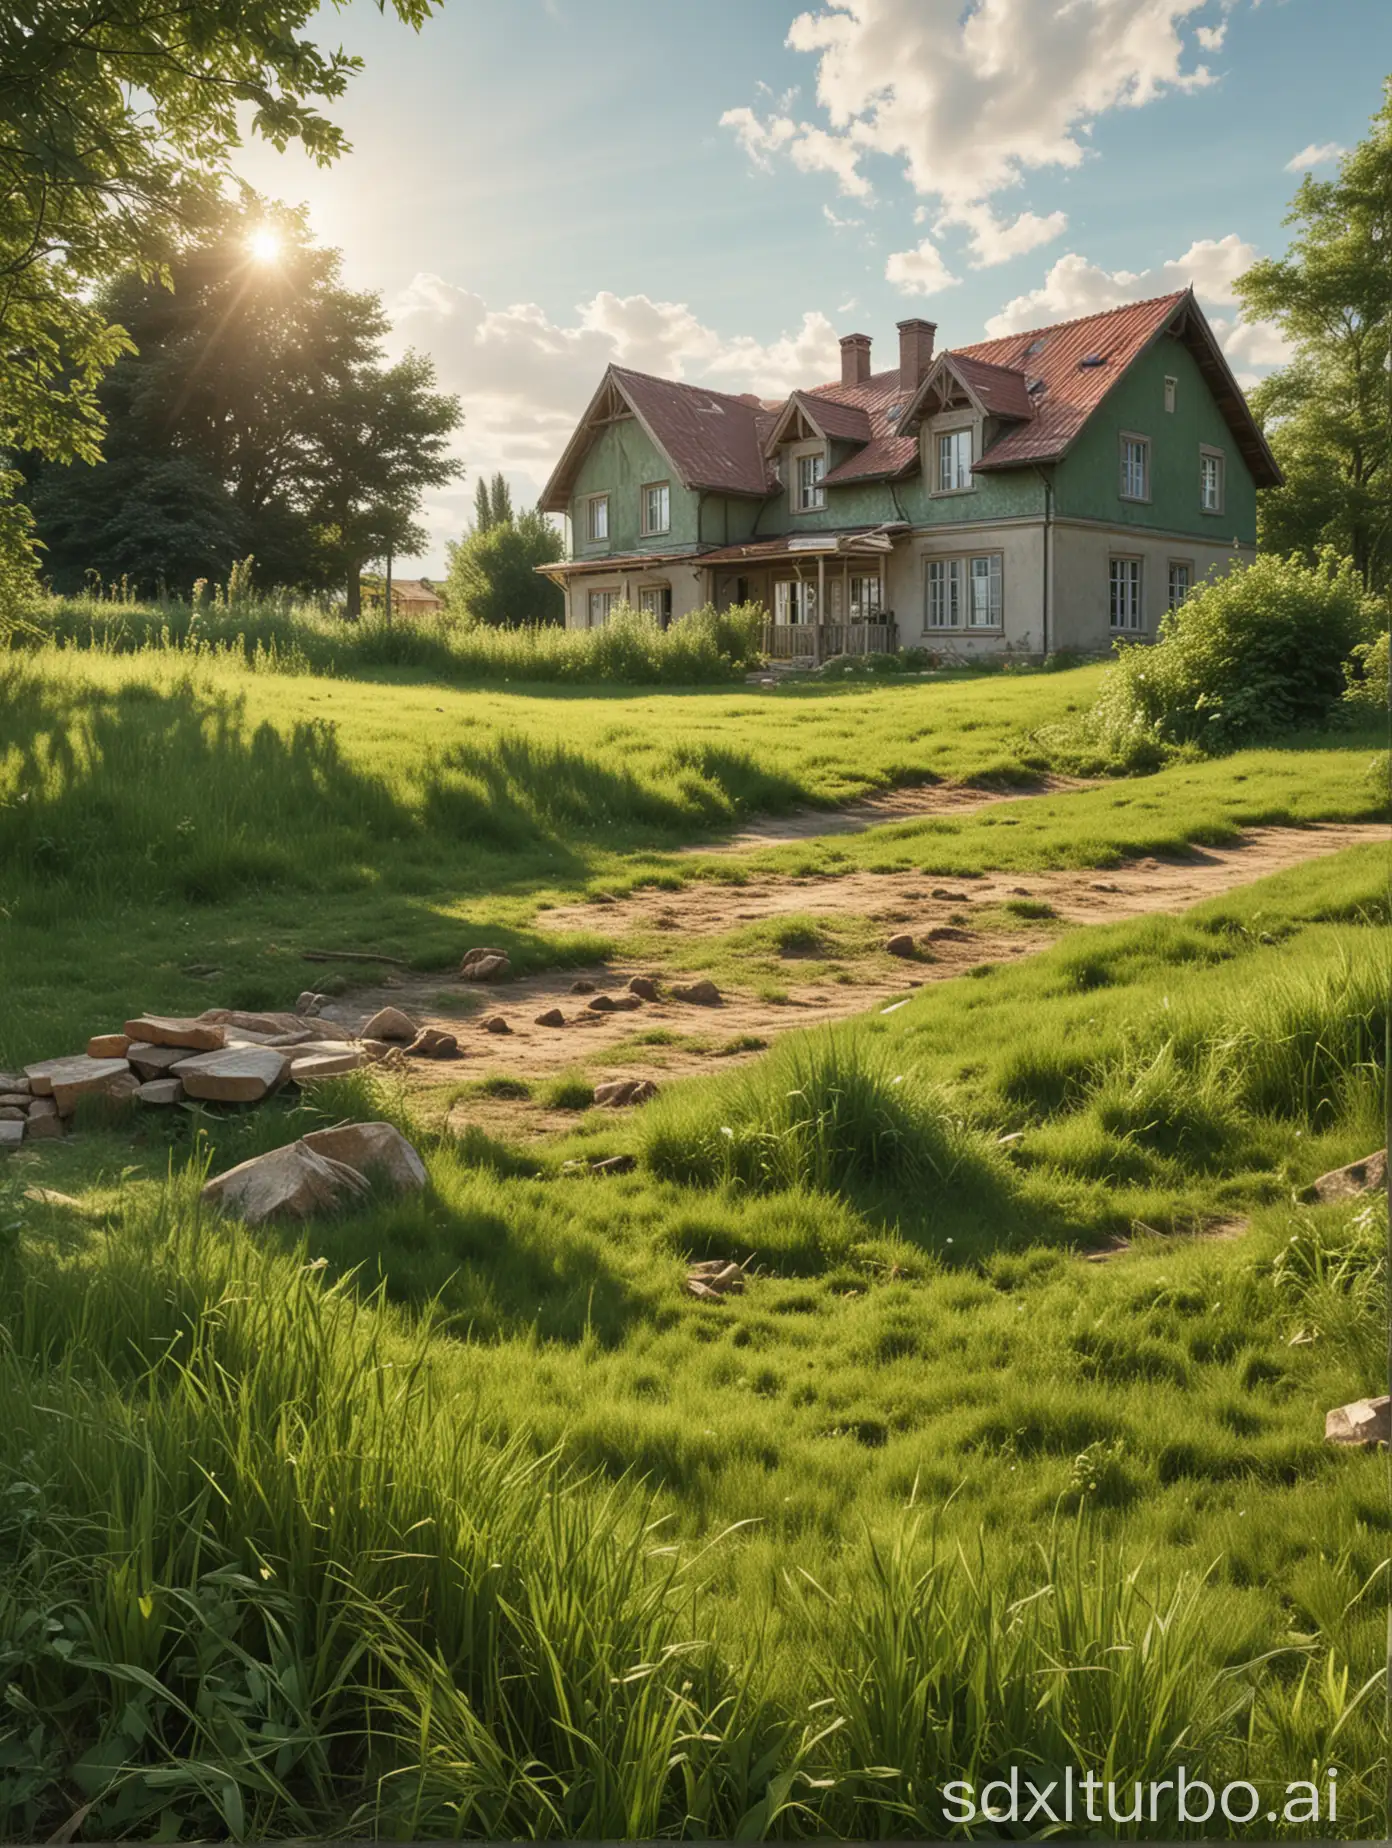 summer, sun, green grass, a country house in the background, another house is being built nearby, realism